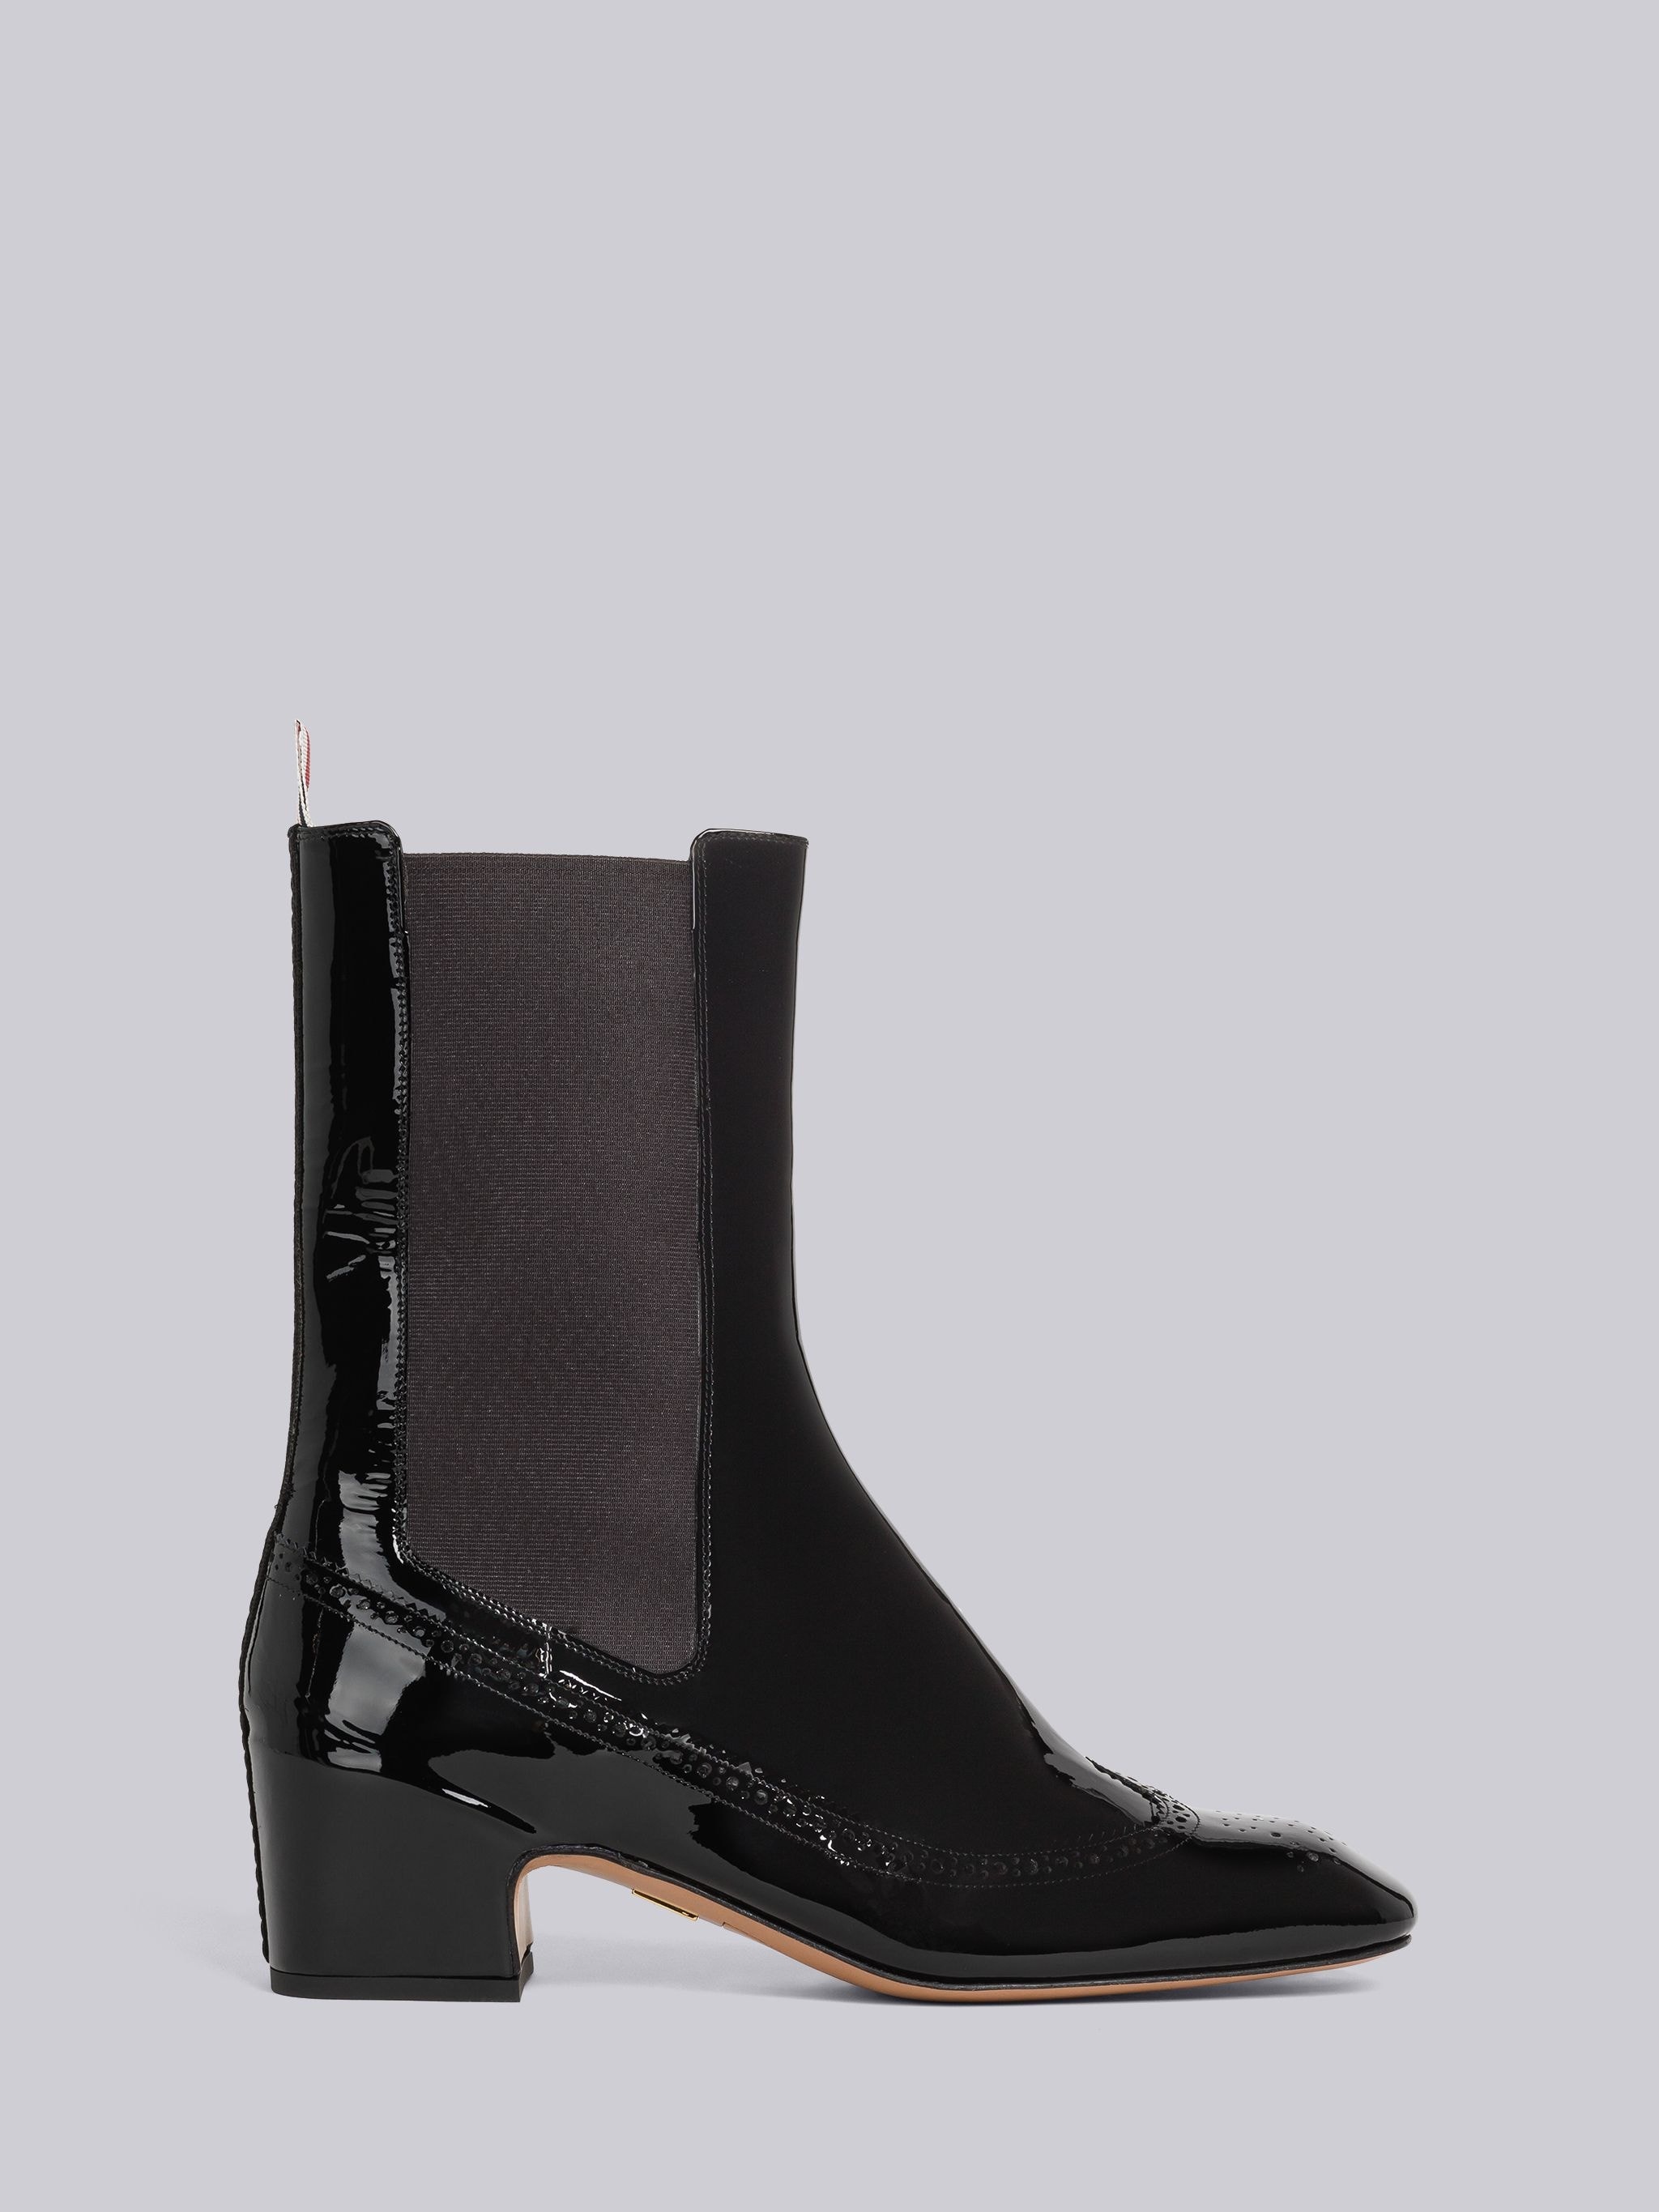 Soft Patent Leather Mid Calf 4-Bar Heeled Chelsea Boot - 1